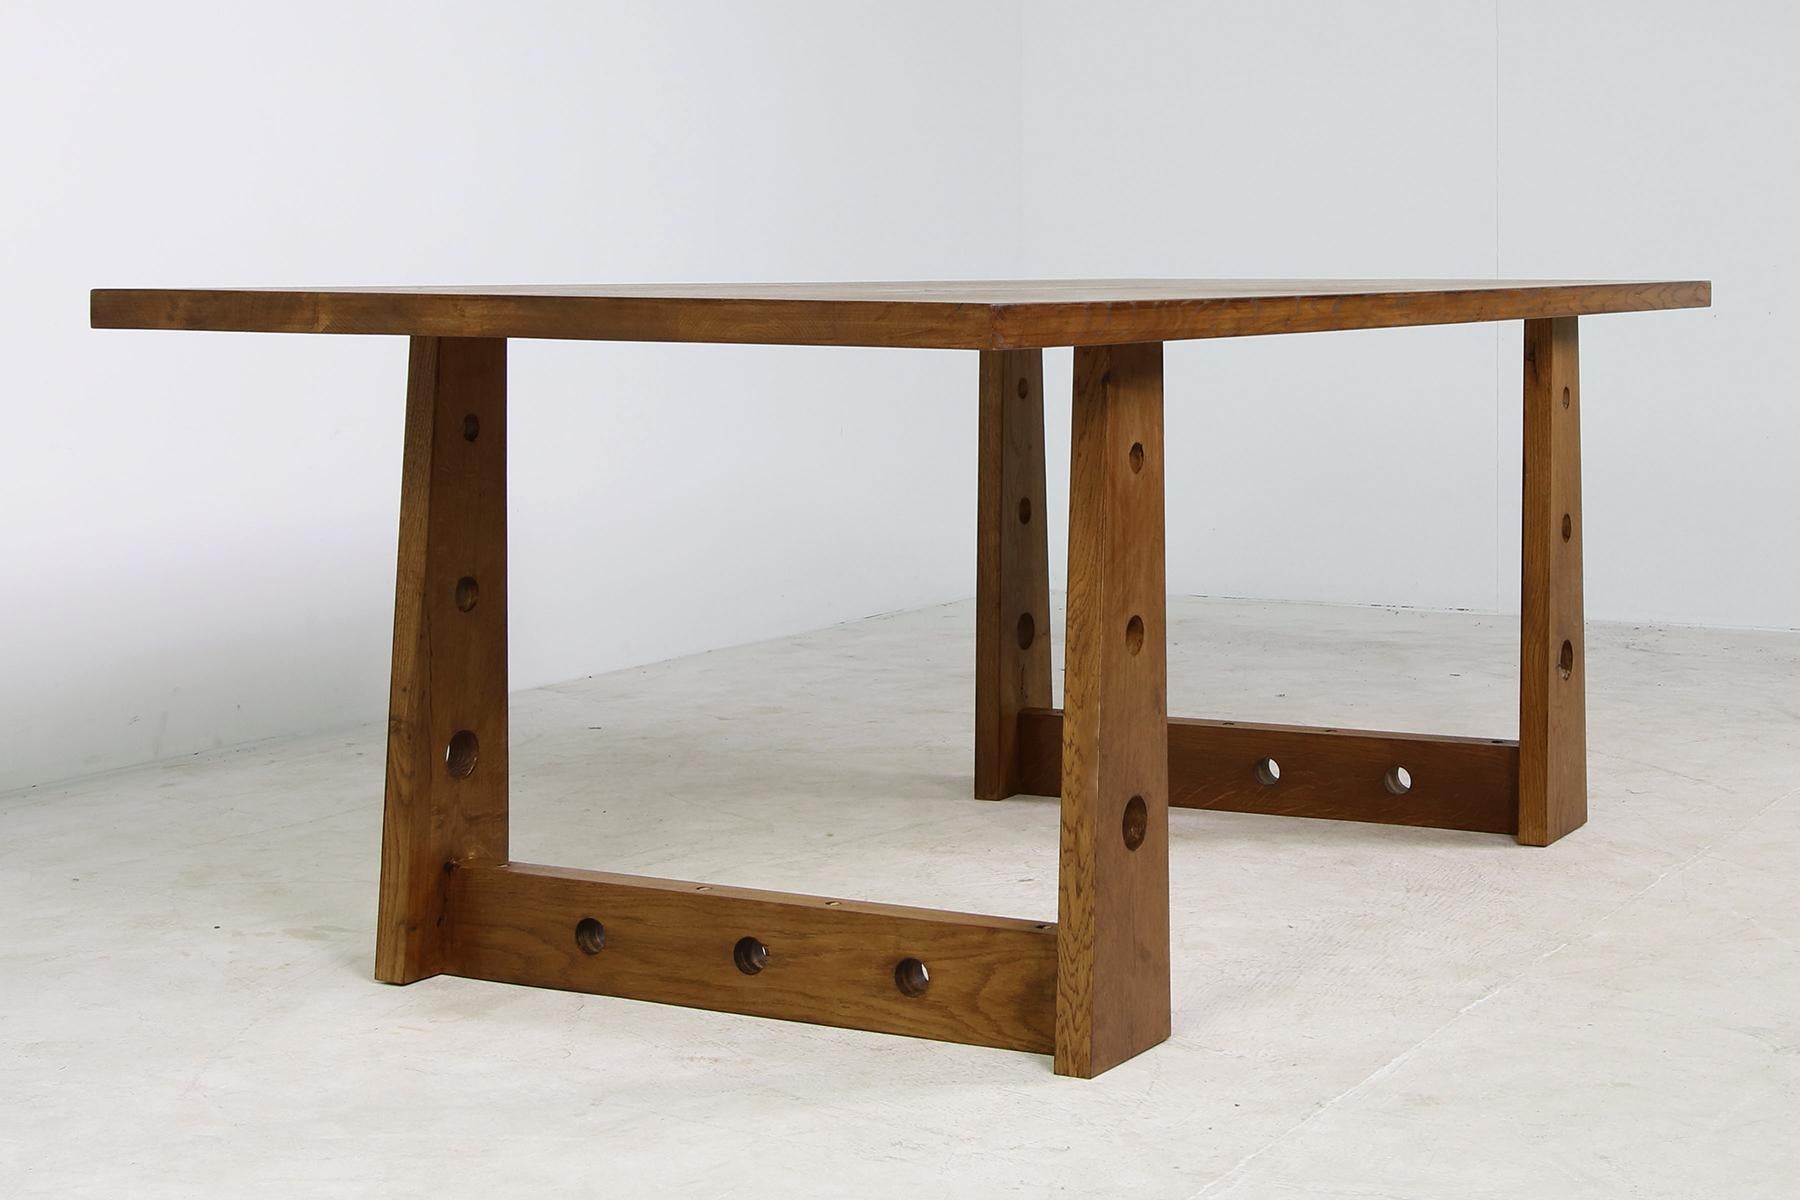 Beautiful contemporary Nathan Lindberg table Mod. #04 heavyweight, solid oak. This piece can be used as a dining table for 6-10 persons (depends on the size of chairs) or as a conference table, or even a large free standing desk. Measure: 7.2